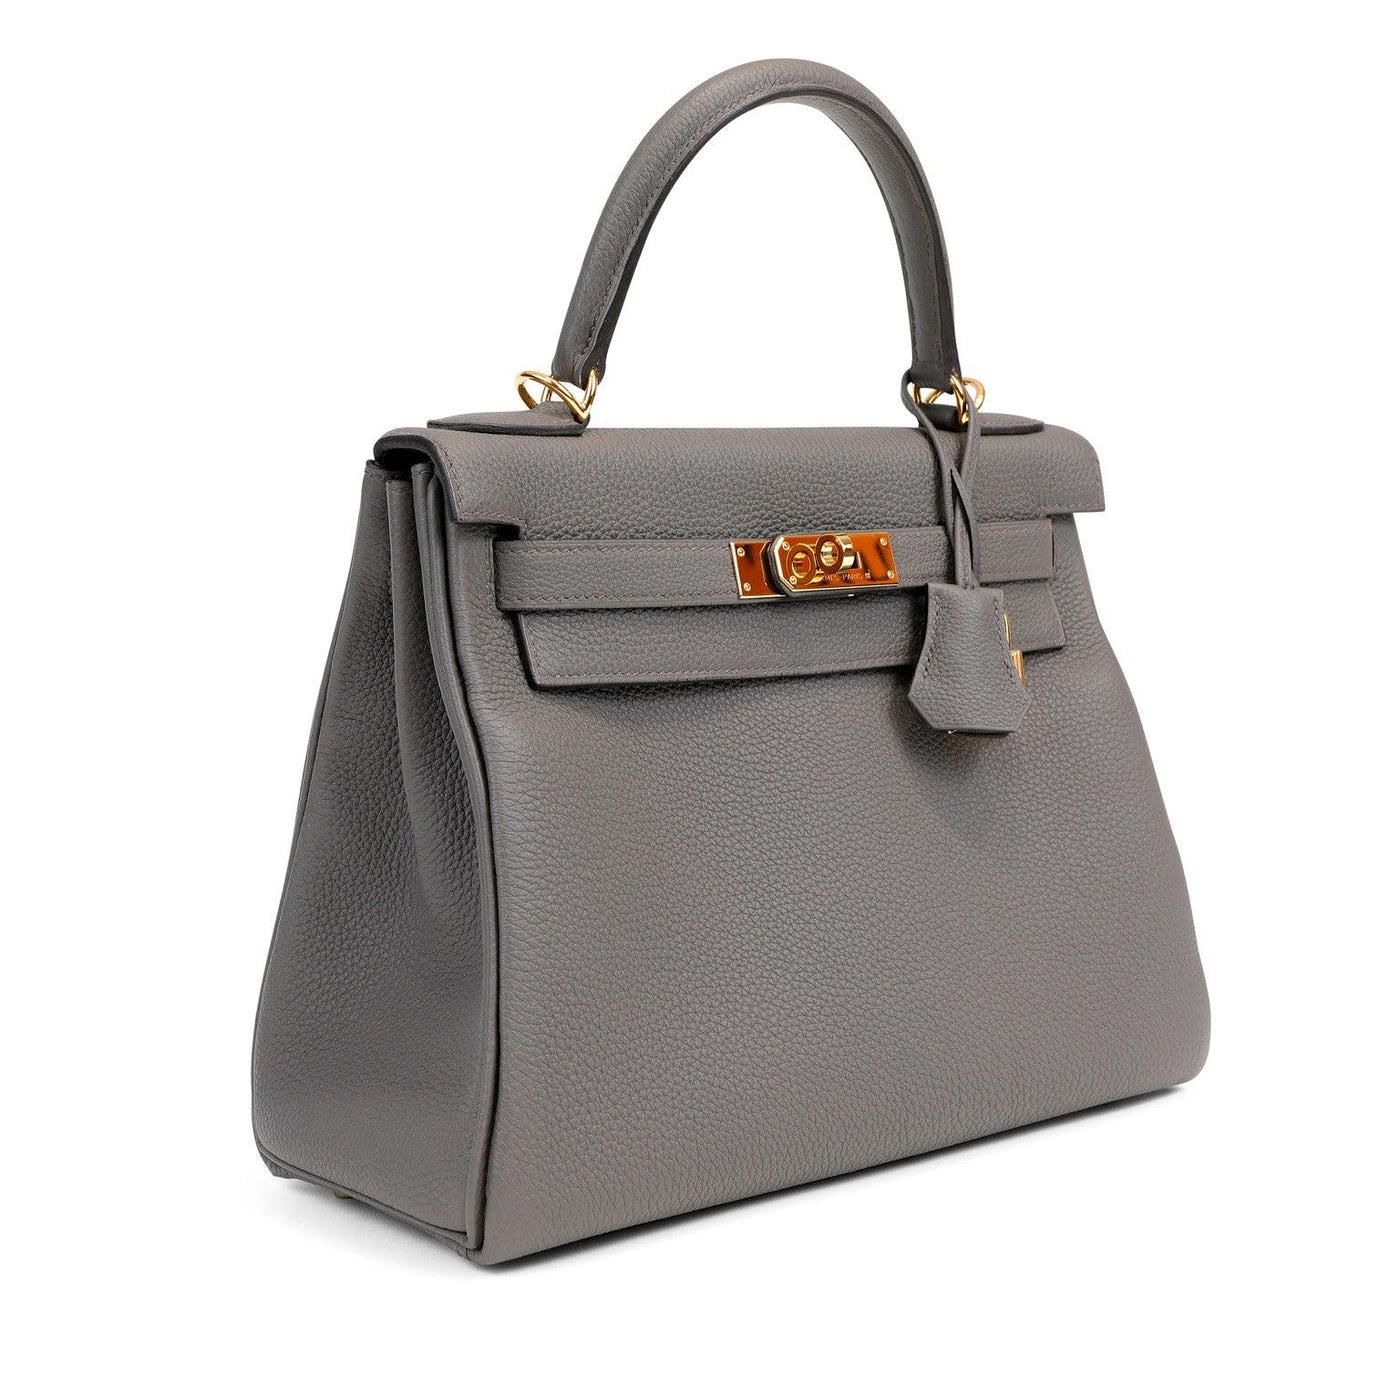 Hermès 28cm Gris Asphalte Togo Leather Kelly with Gold Hardware - Only Authentics